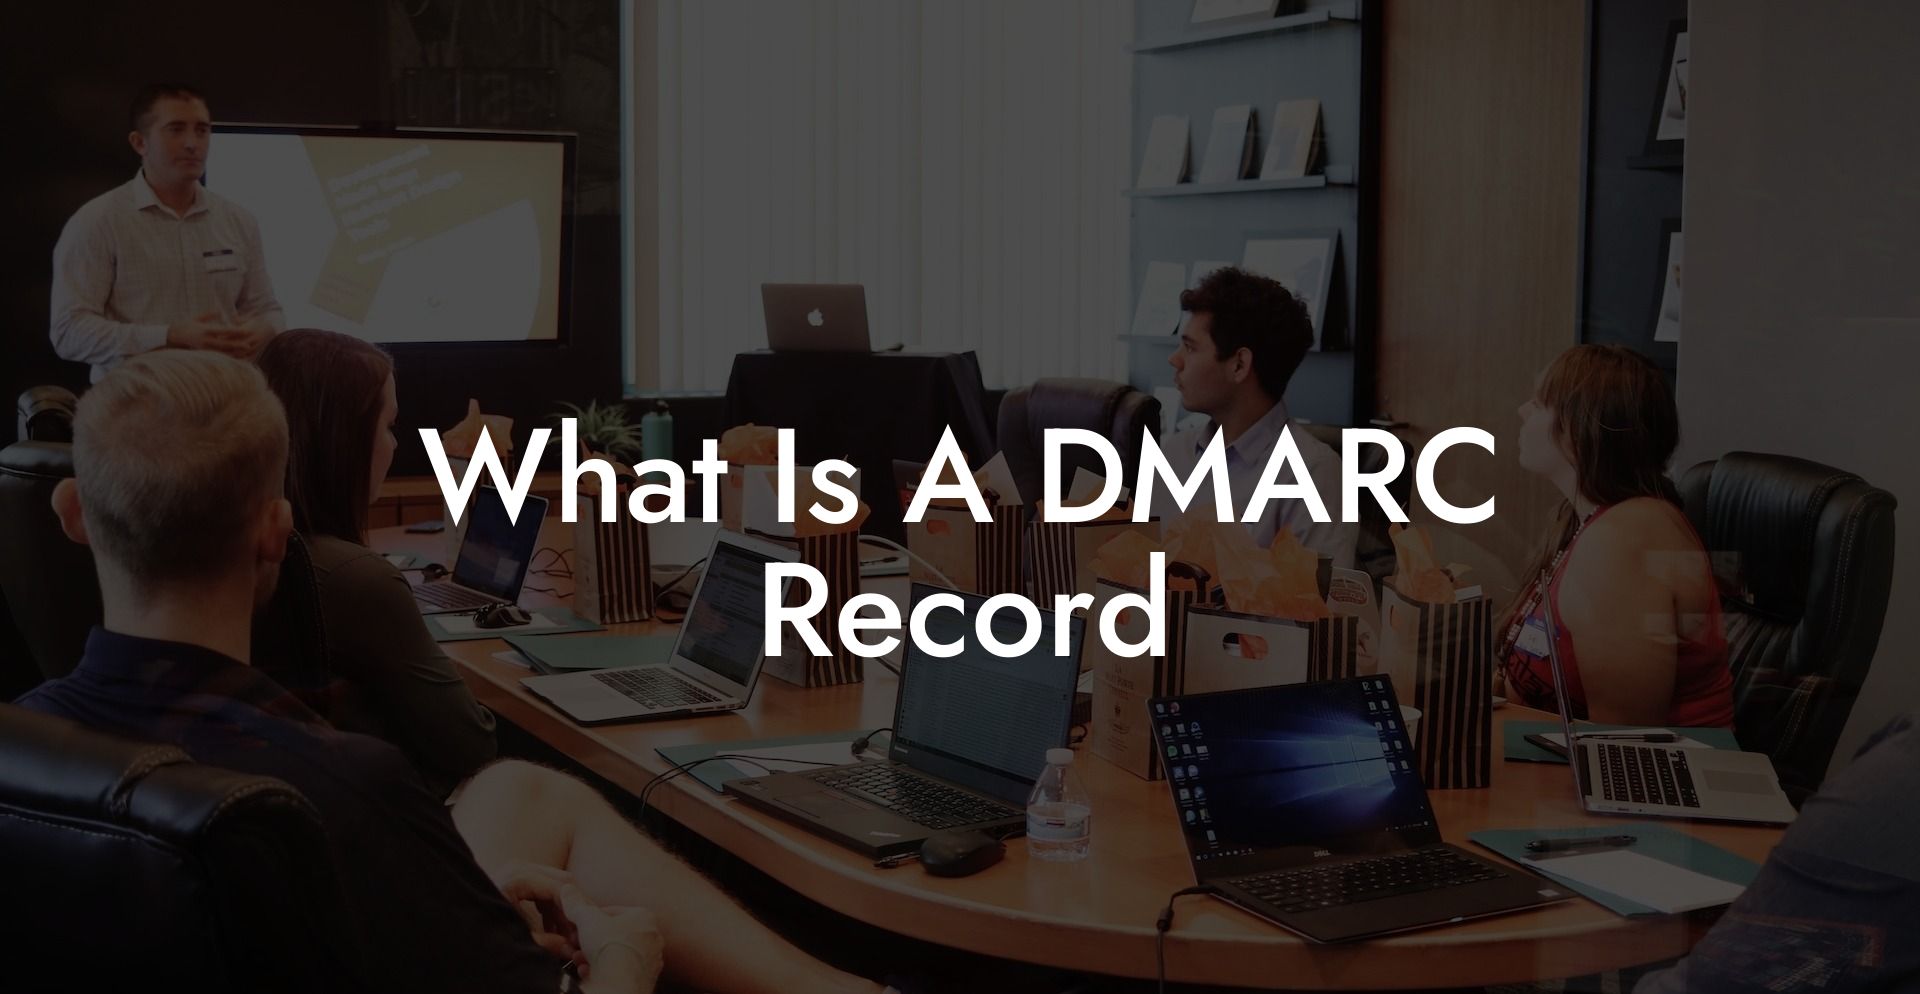 What Is A DMARC Record